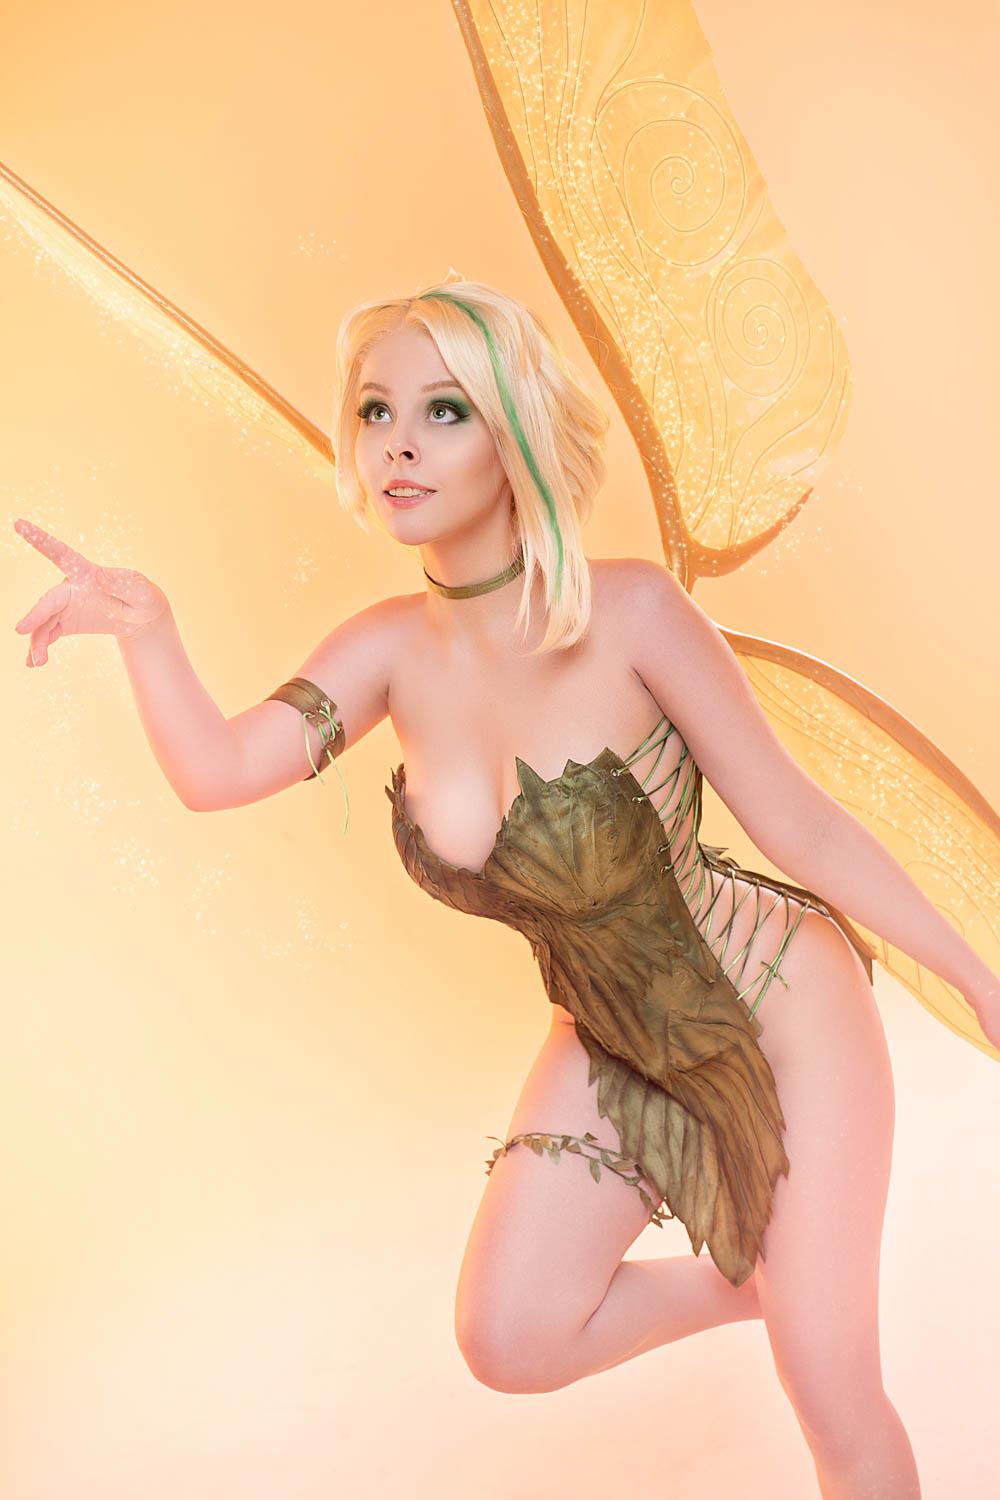 1000px x 1500px - Tinkerbell cosplay by Helly Valentine